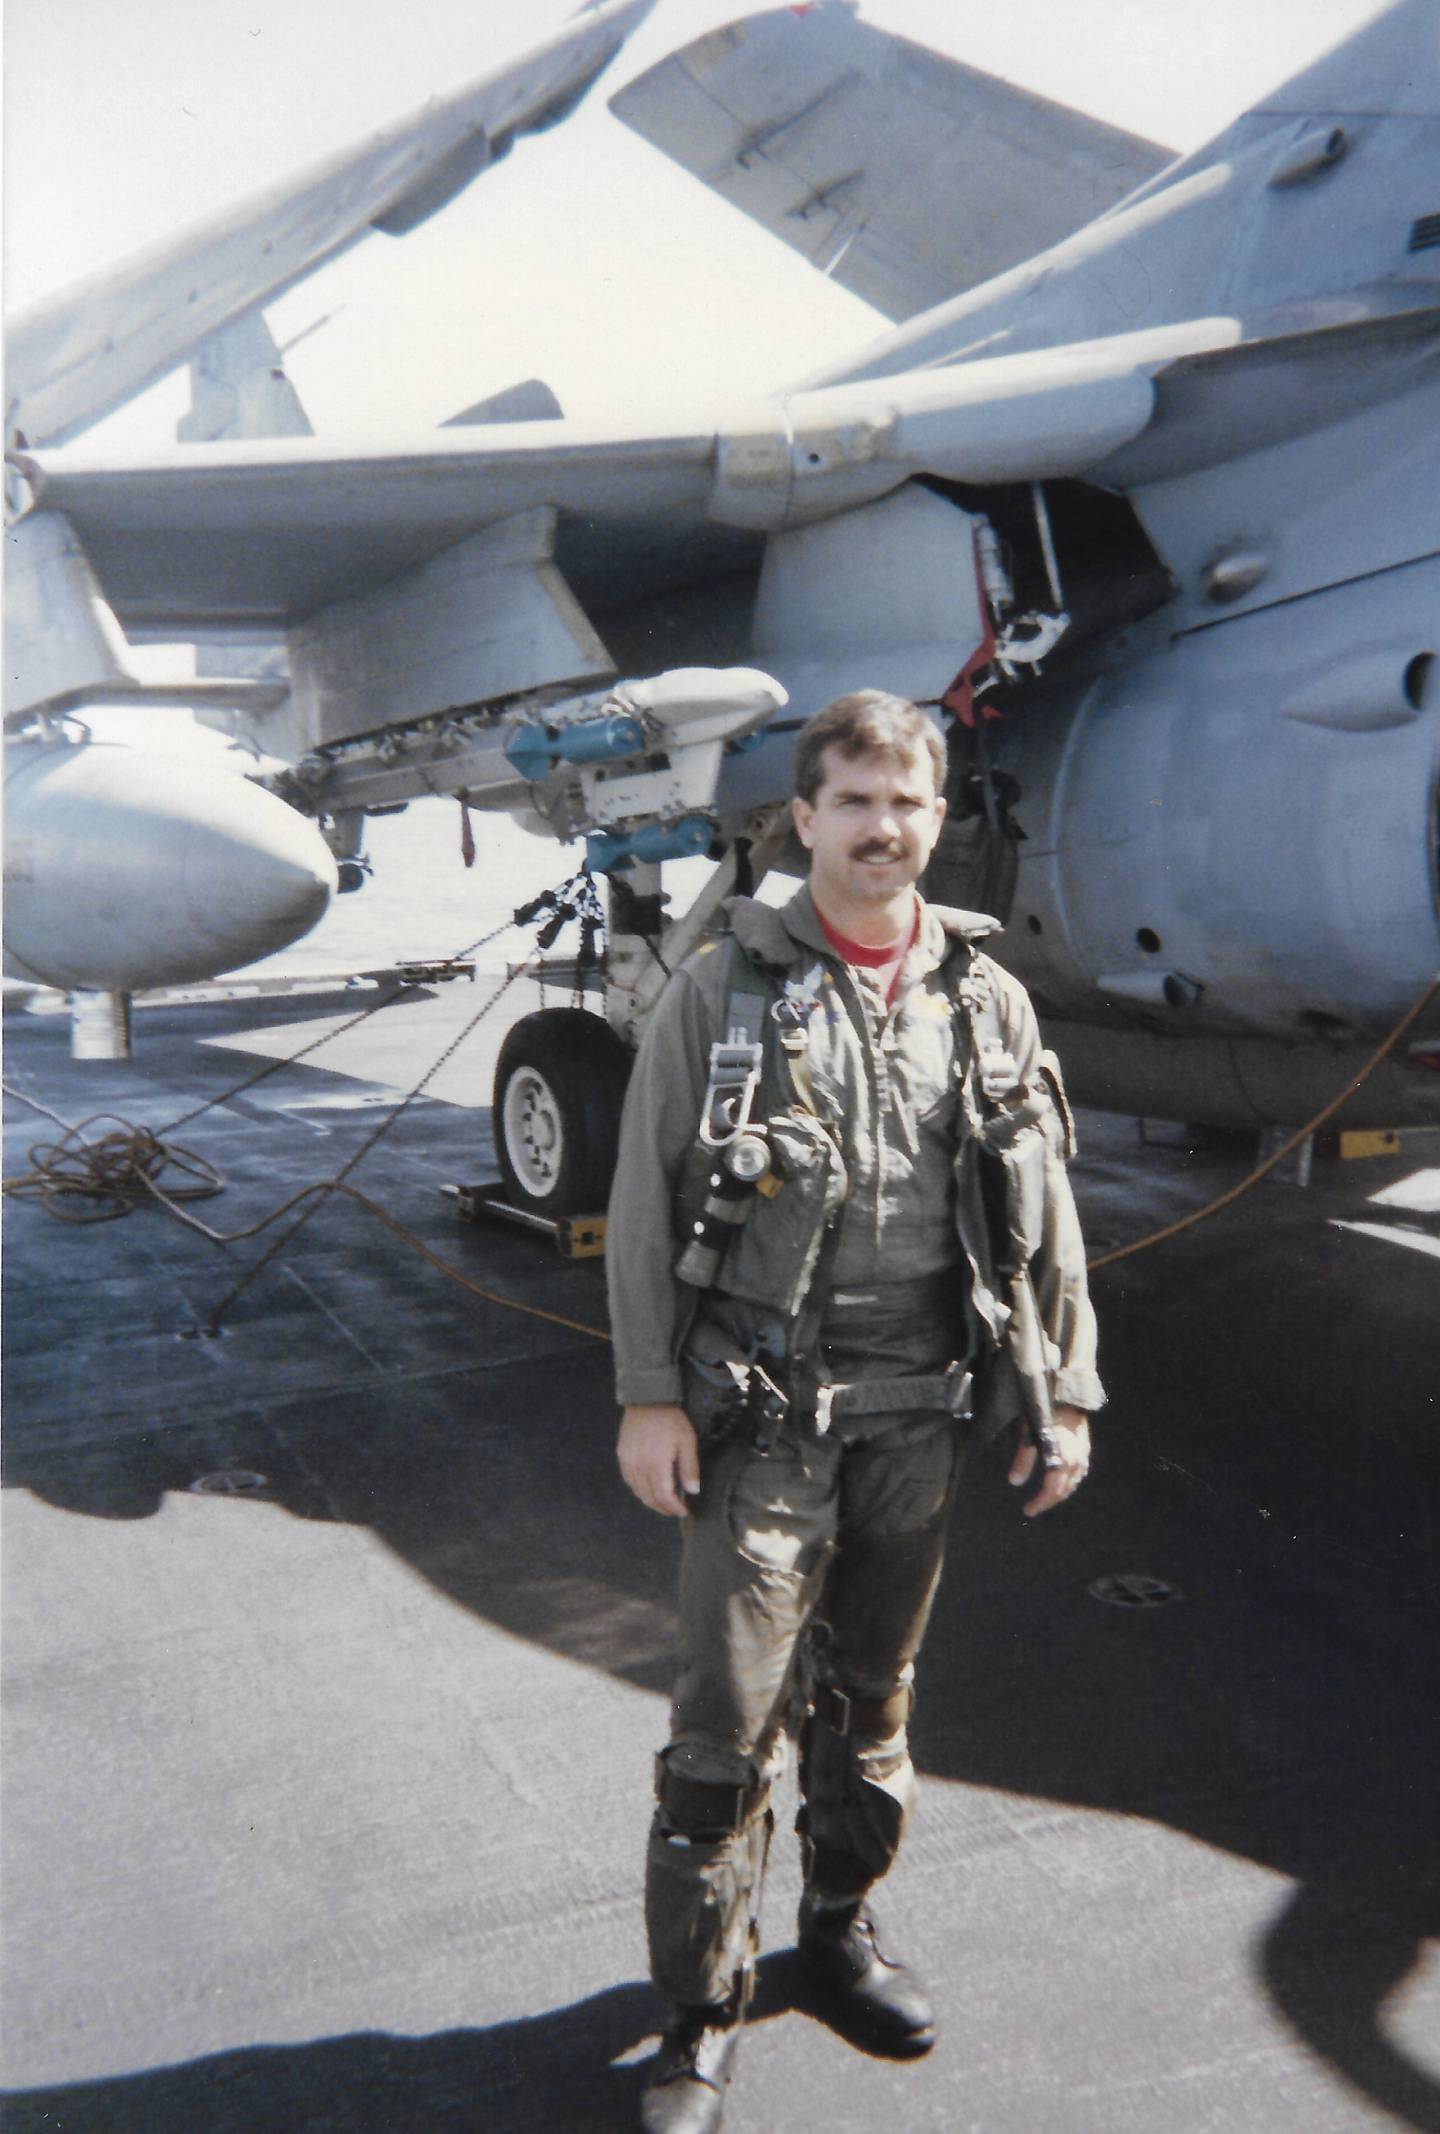 This image provided by Betty Seaman shows Navy A-6 Intruder pilot Jim Seaman. Navy Capt. Jim Seaman died of lung cancer at the age of 61.